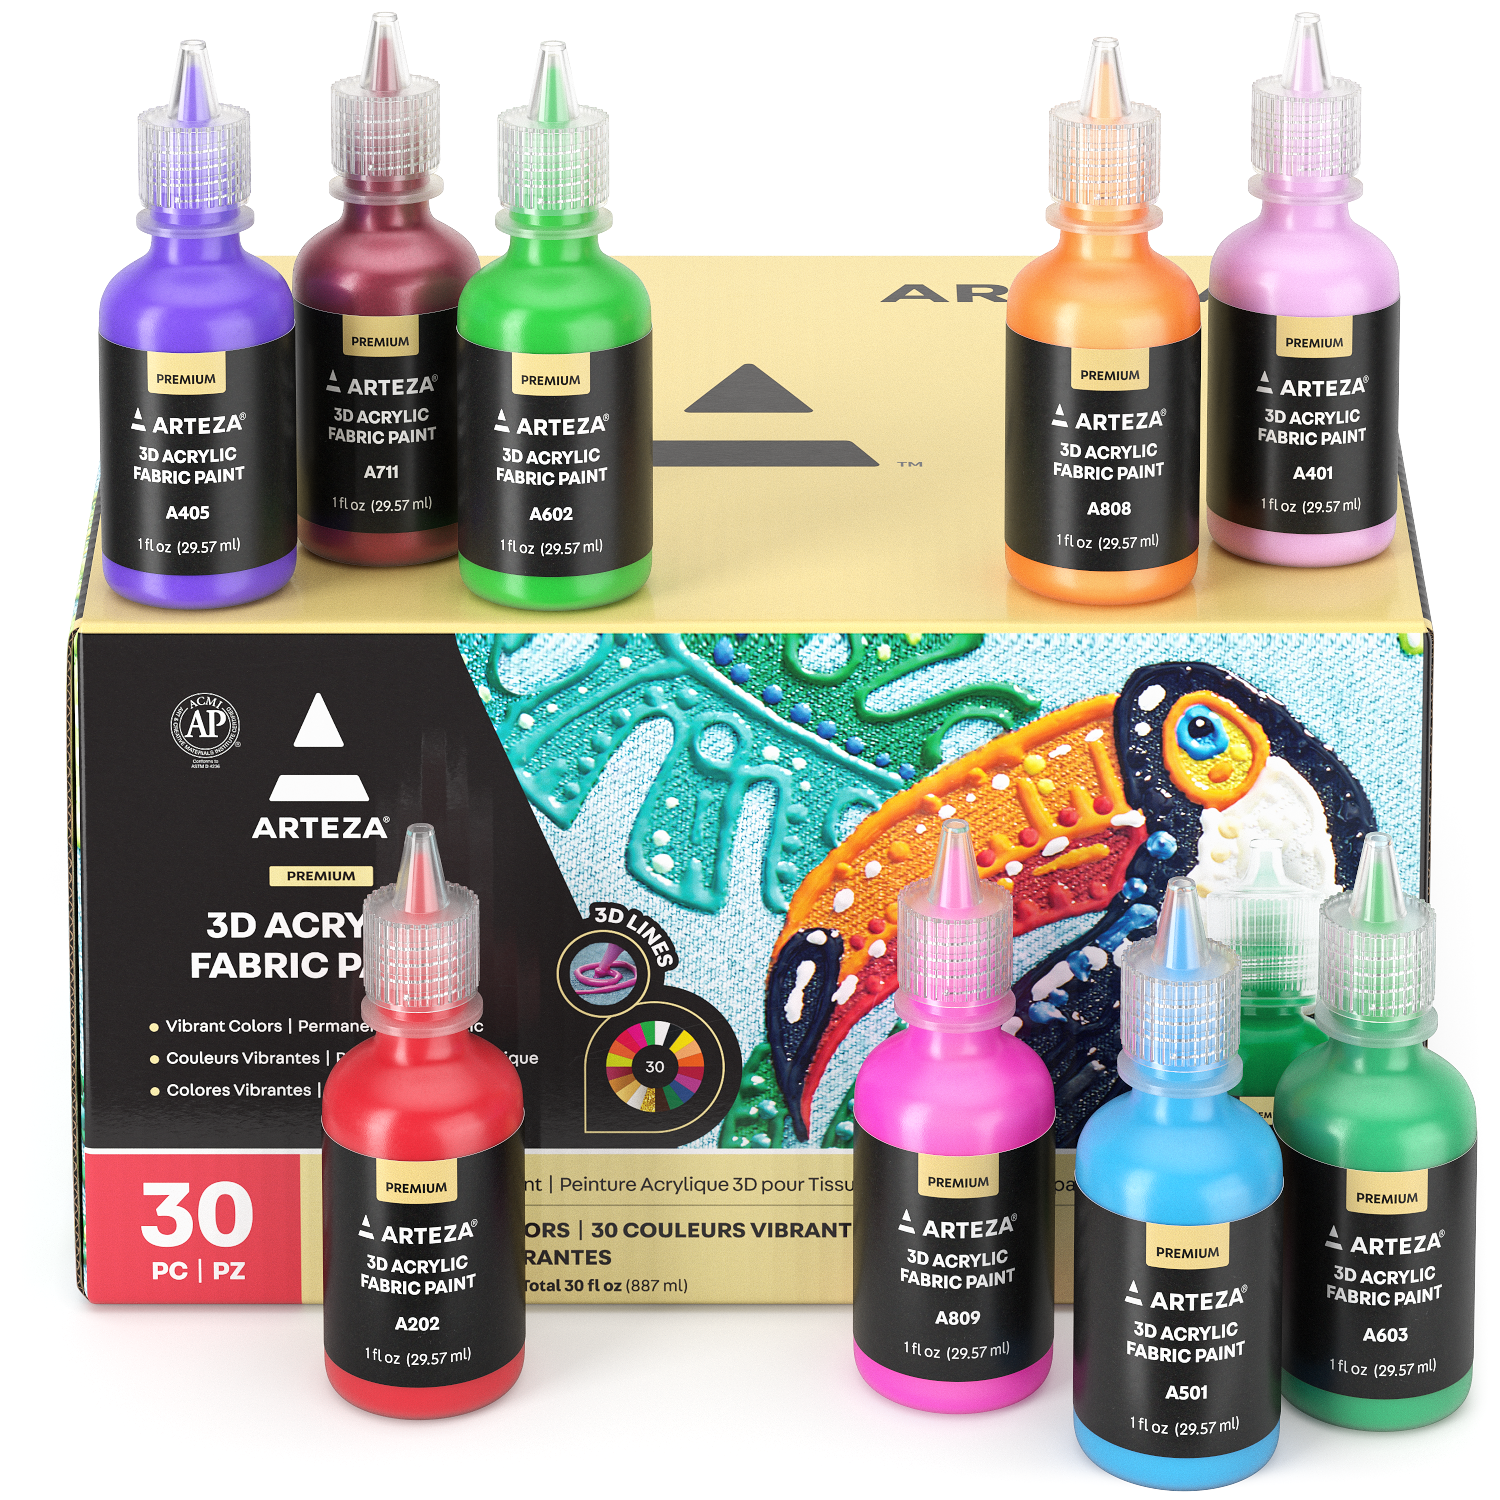 Shuttle Art Color Change Acrylic Paint, 20 Chameleon Colors Acrylic Paint,  60ml/2oz Bottles, Iridescent Paint for Artists, Beginners, Kids Painting &  Crafting on Canvas, Rocks, Wood, Fabric, Ceramic